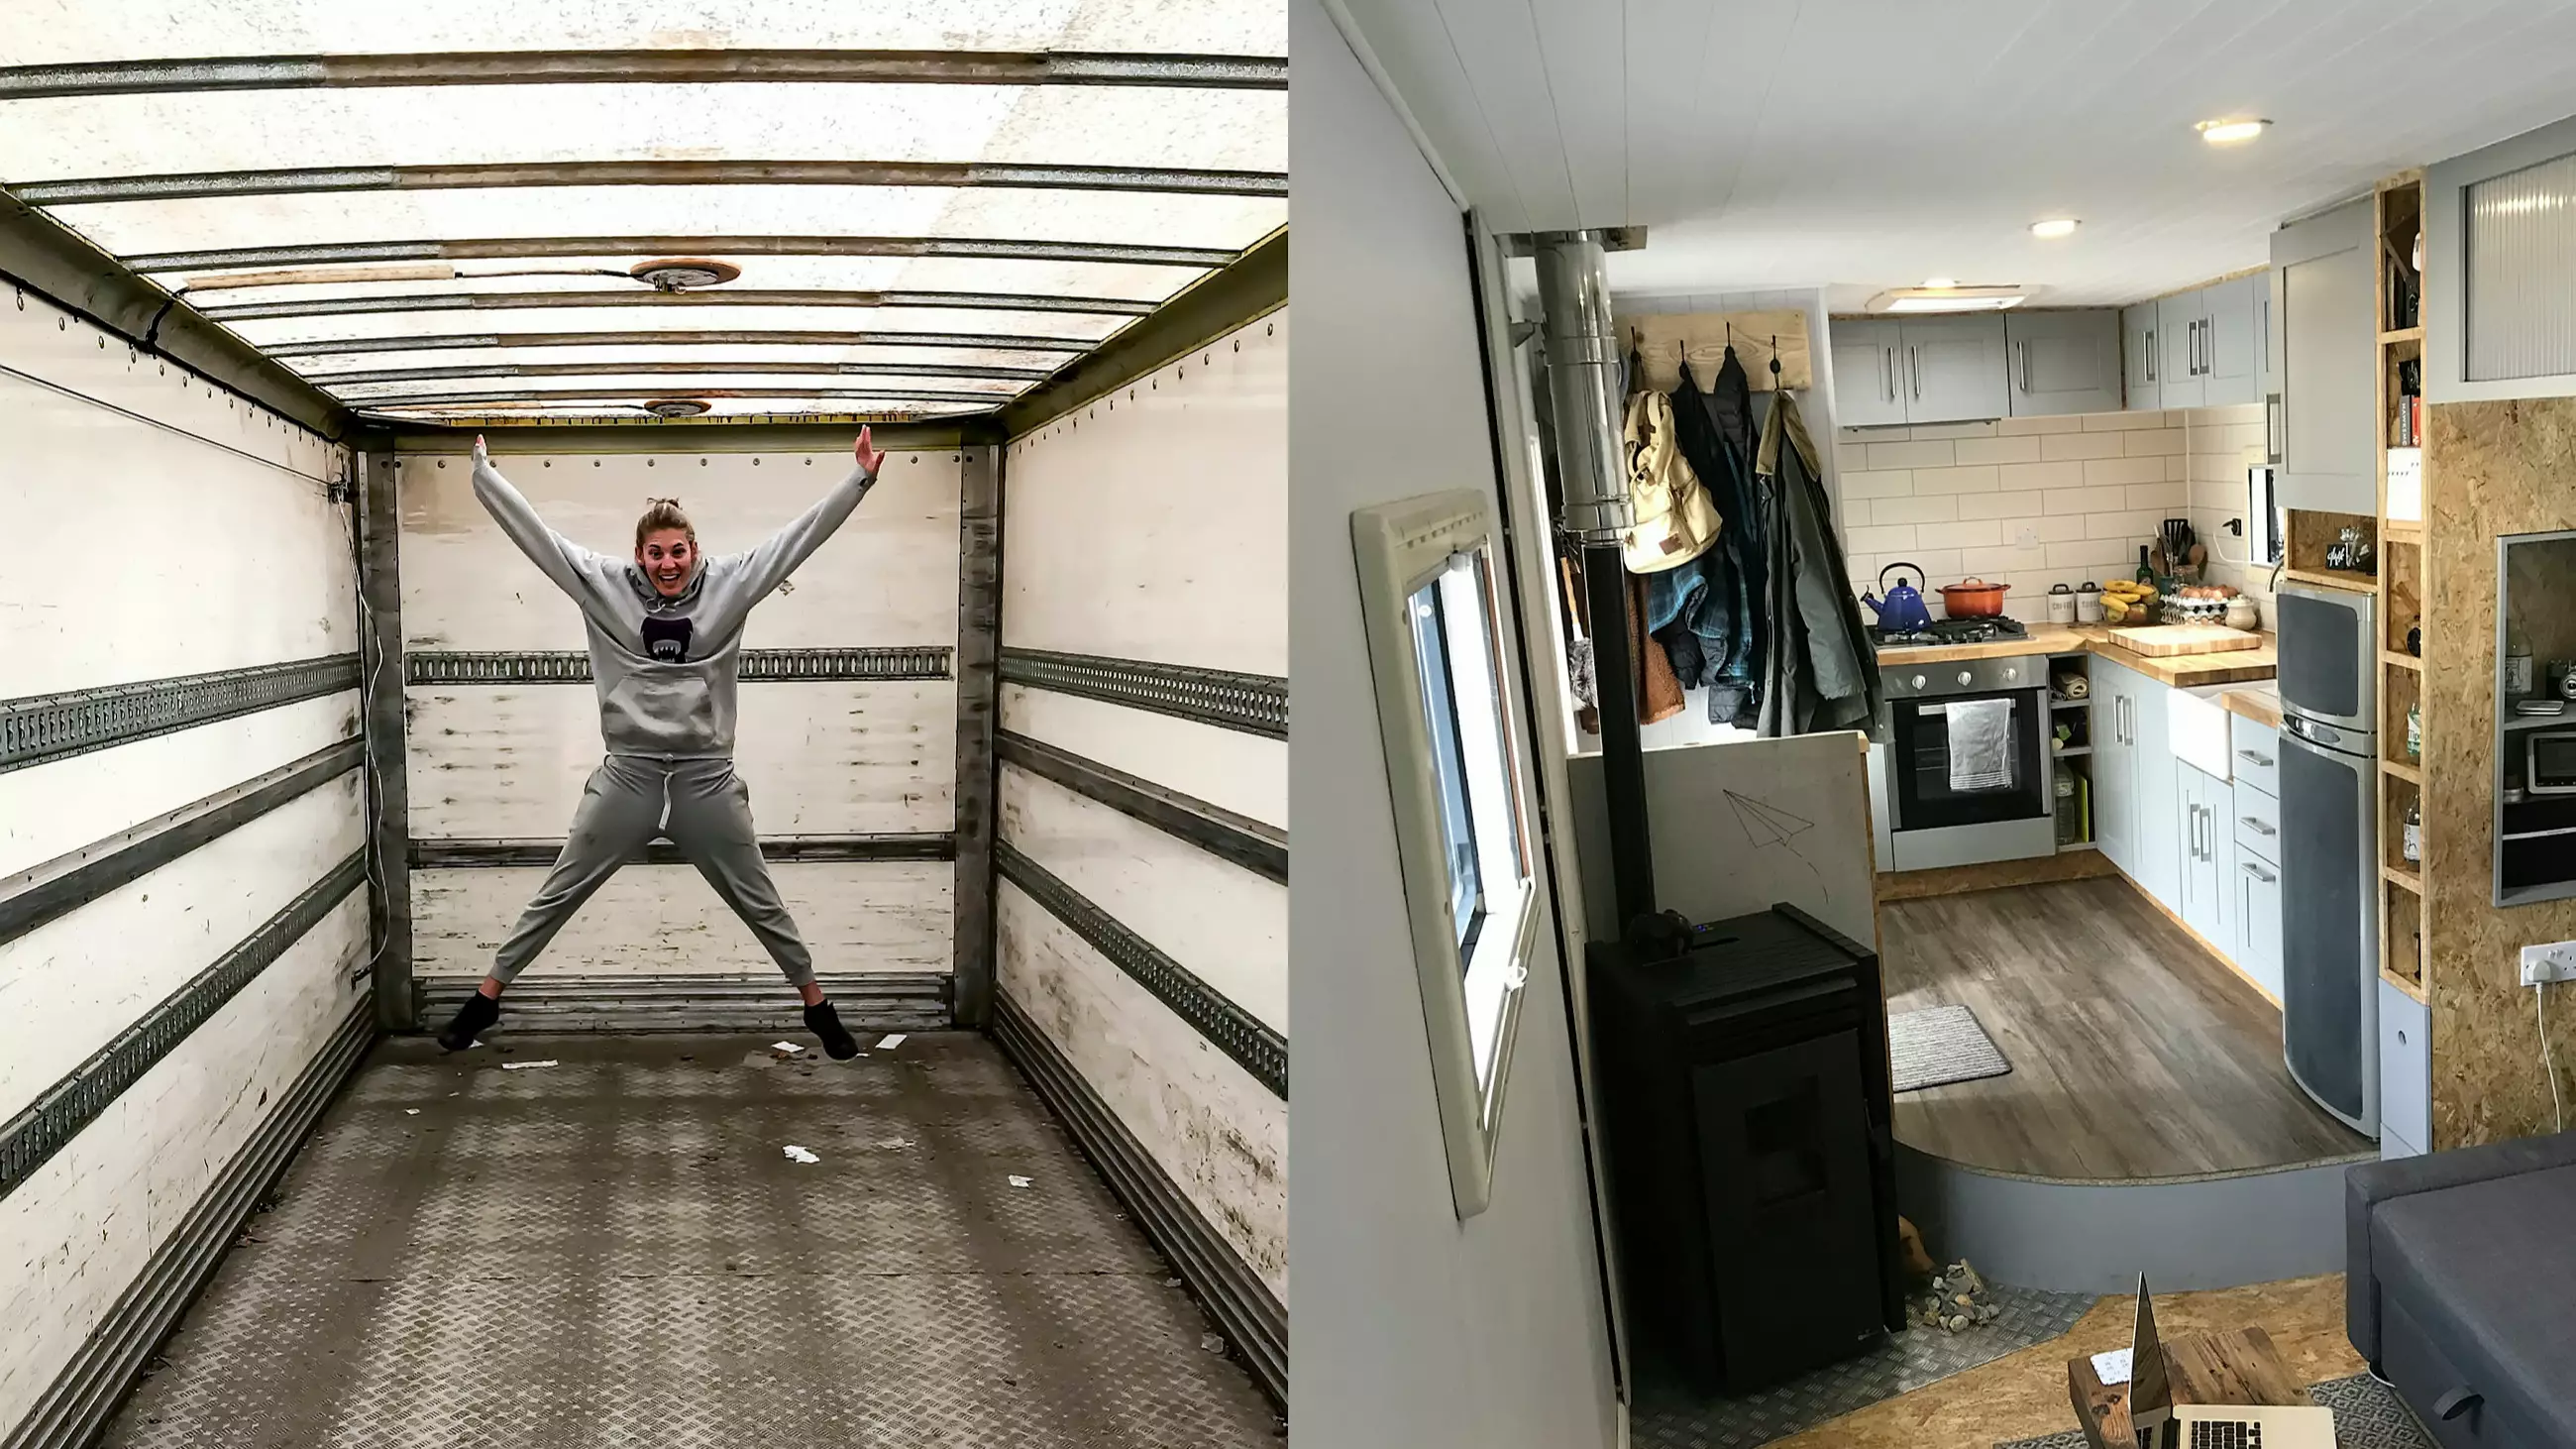 ​Couple Renovate Knackered Old Bread Van Into Dream Home For Just £20k